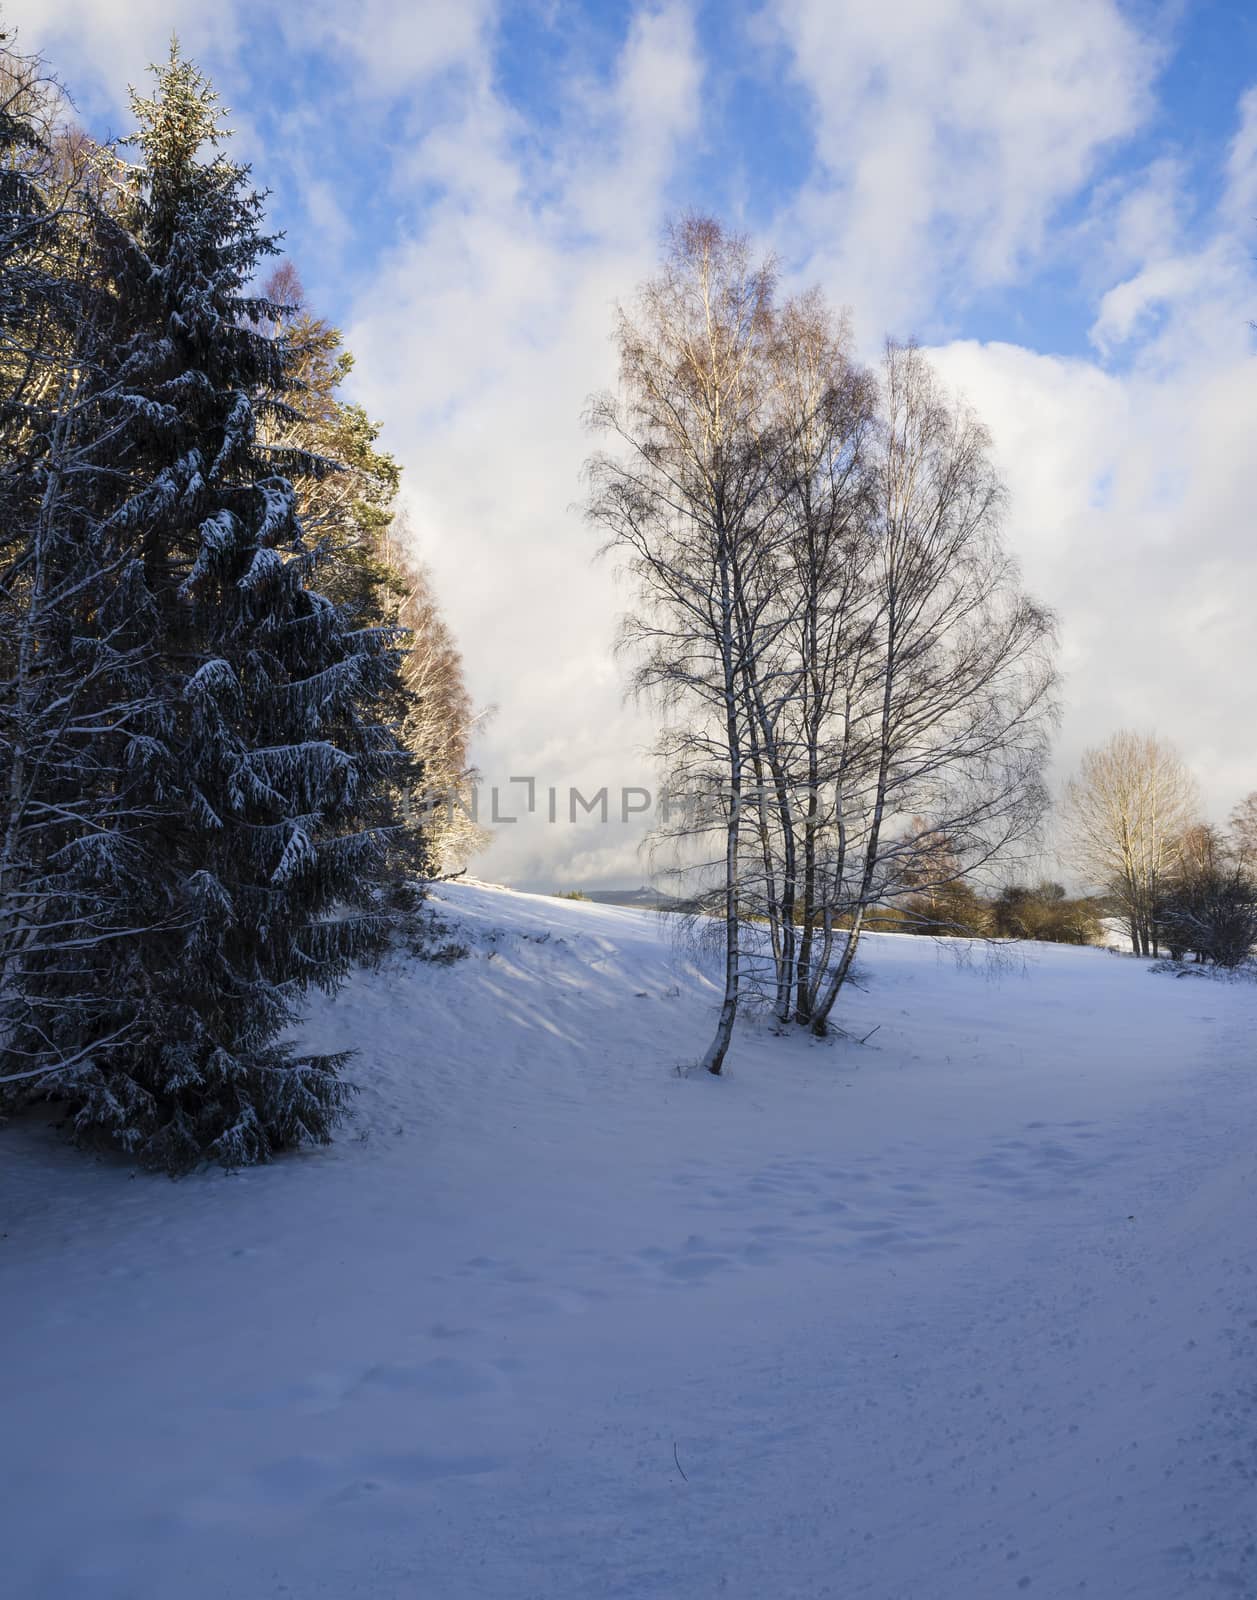 snow covered asphalt meadow in winter forest with tall tree, sunny day.